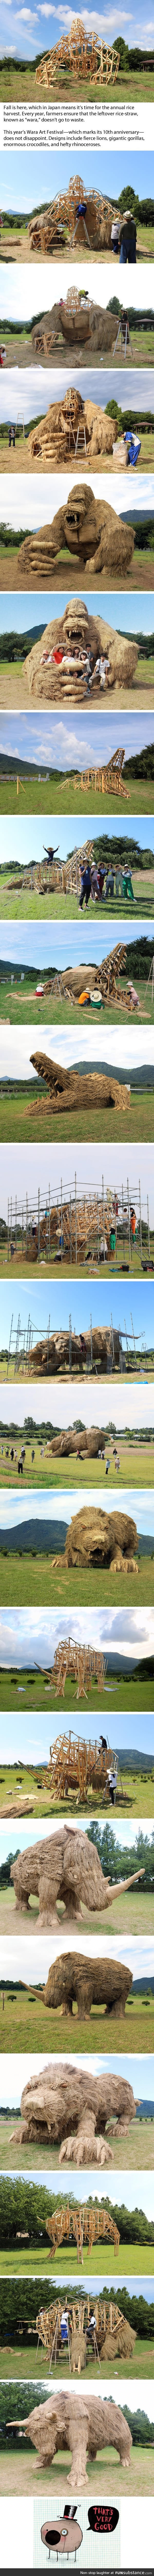 The 10th Annual Wara Art Festival In Japan Presents Some Super-Sized Rice Straw Sculptures